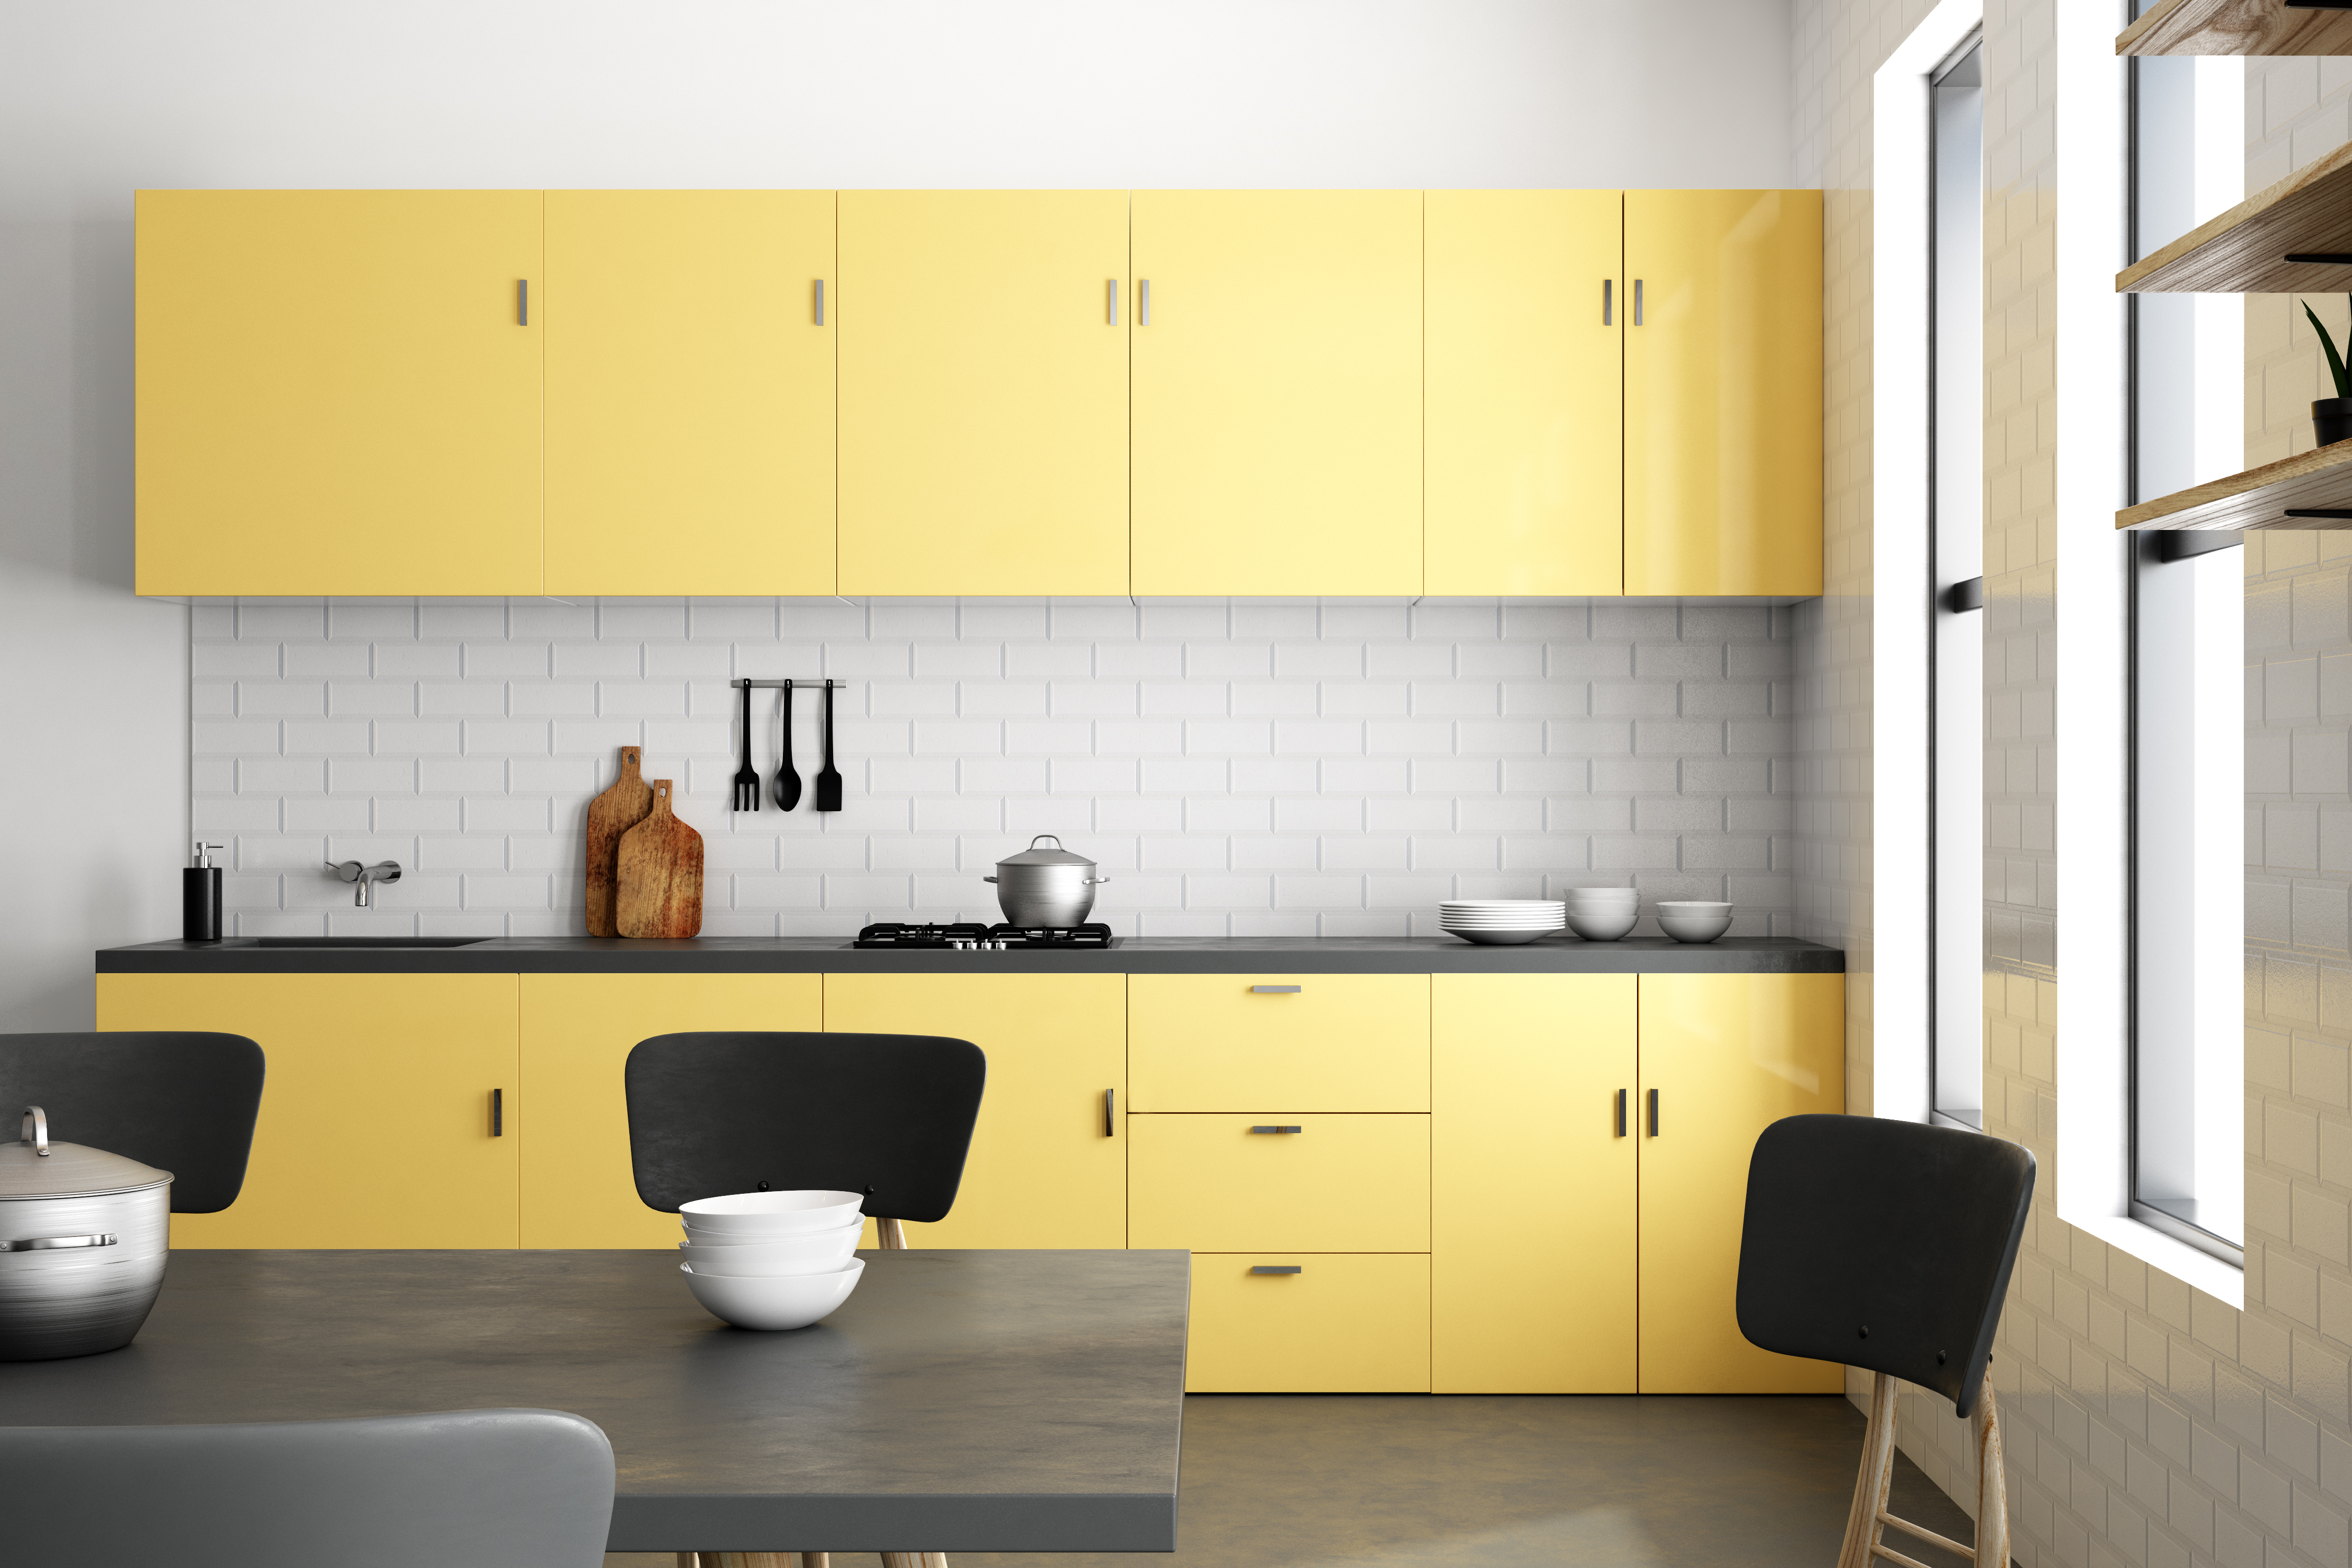 How to Choose the Right Laminate for your Kitchen HomeLane Blog